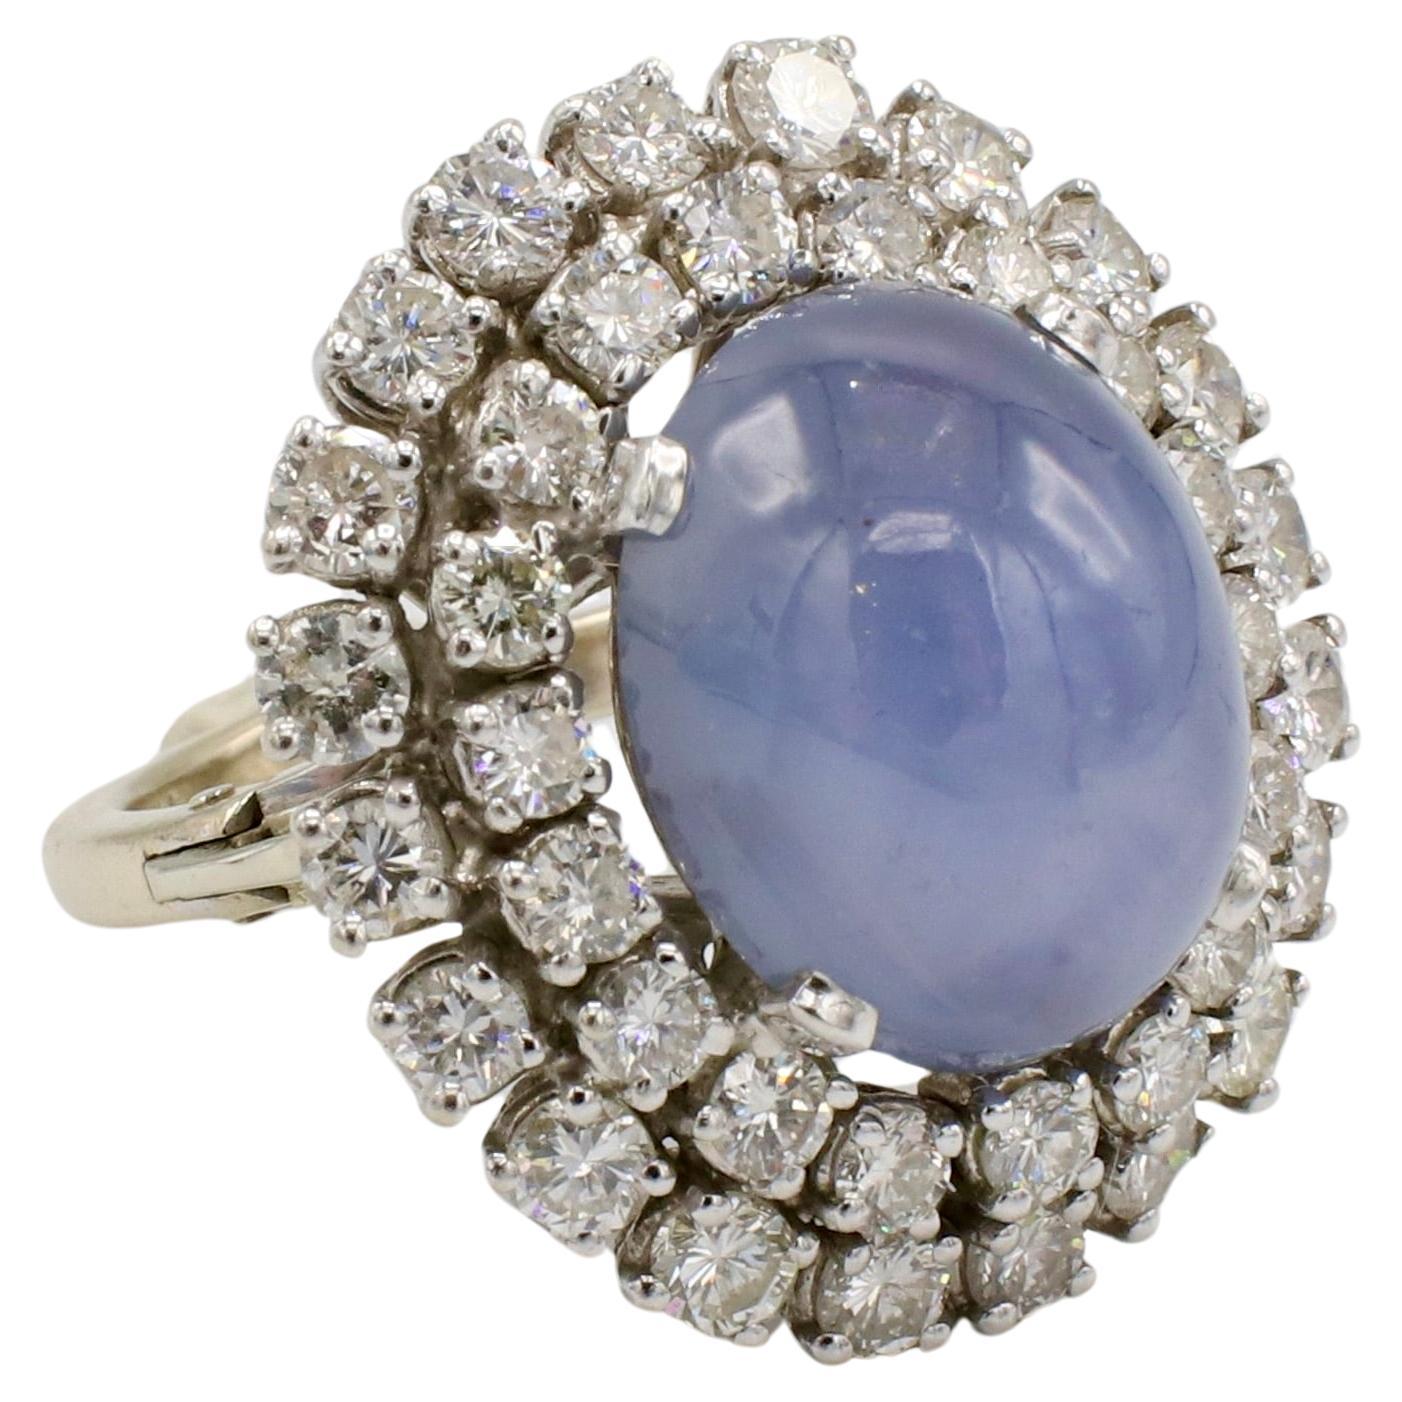 Retro Blue Star Sapphire & Natural Diamond Double Halo Cocktail Dome Ring 
Metal: 14k white gold
Weight: 12.55 grams
Sapphire: 15 x 12.5 cabochon, approx .17 carats 
Diamonds: Approx. 3.5 CTW G-H VS round natural diamonds
Top: 25 x 22.5mm
Height: